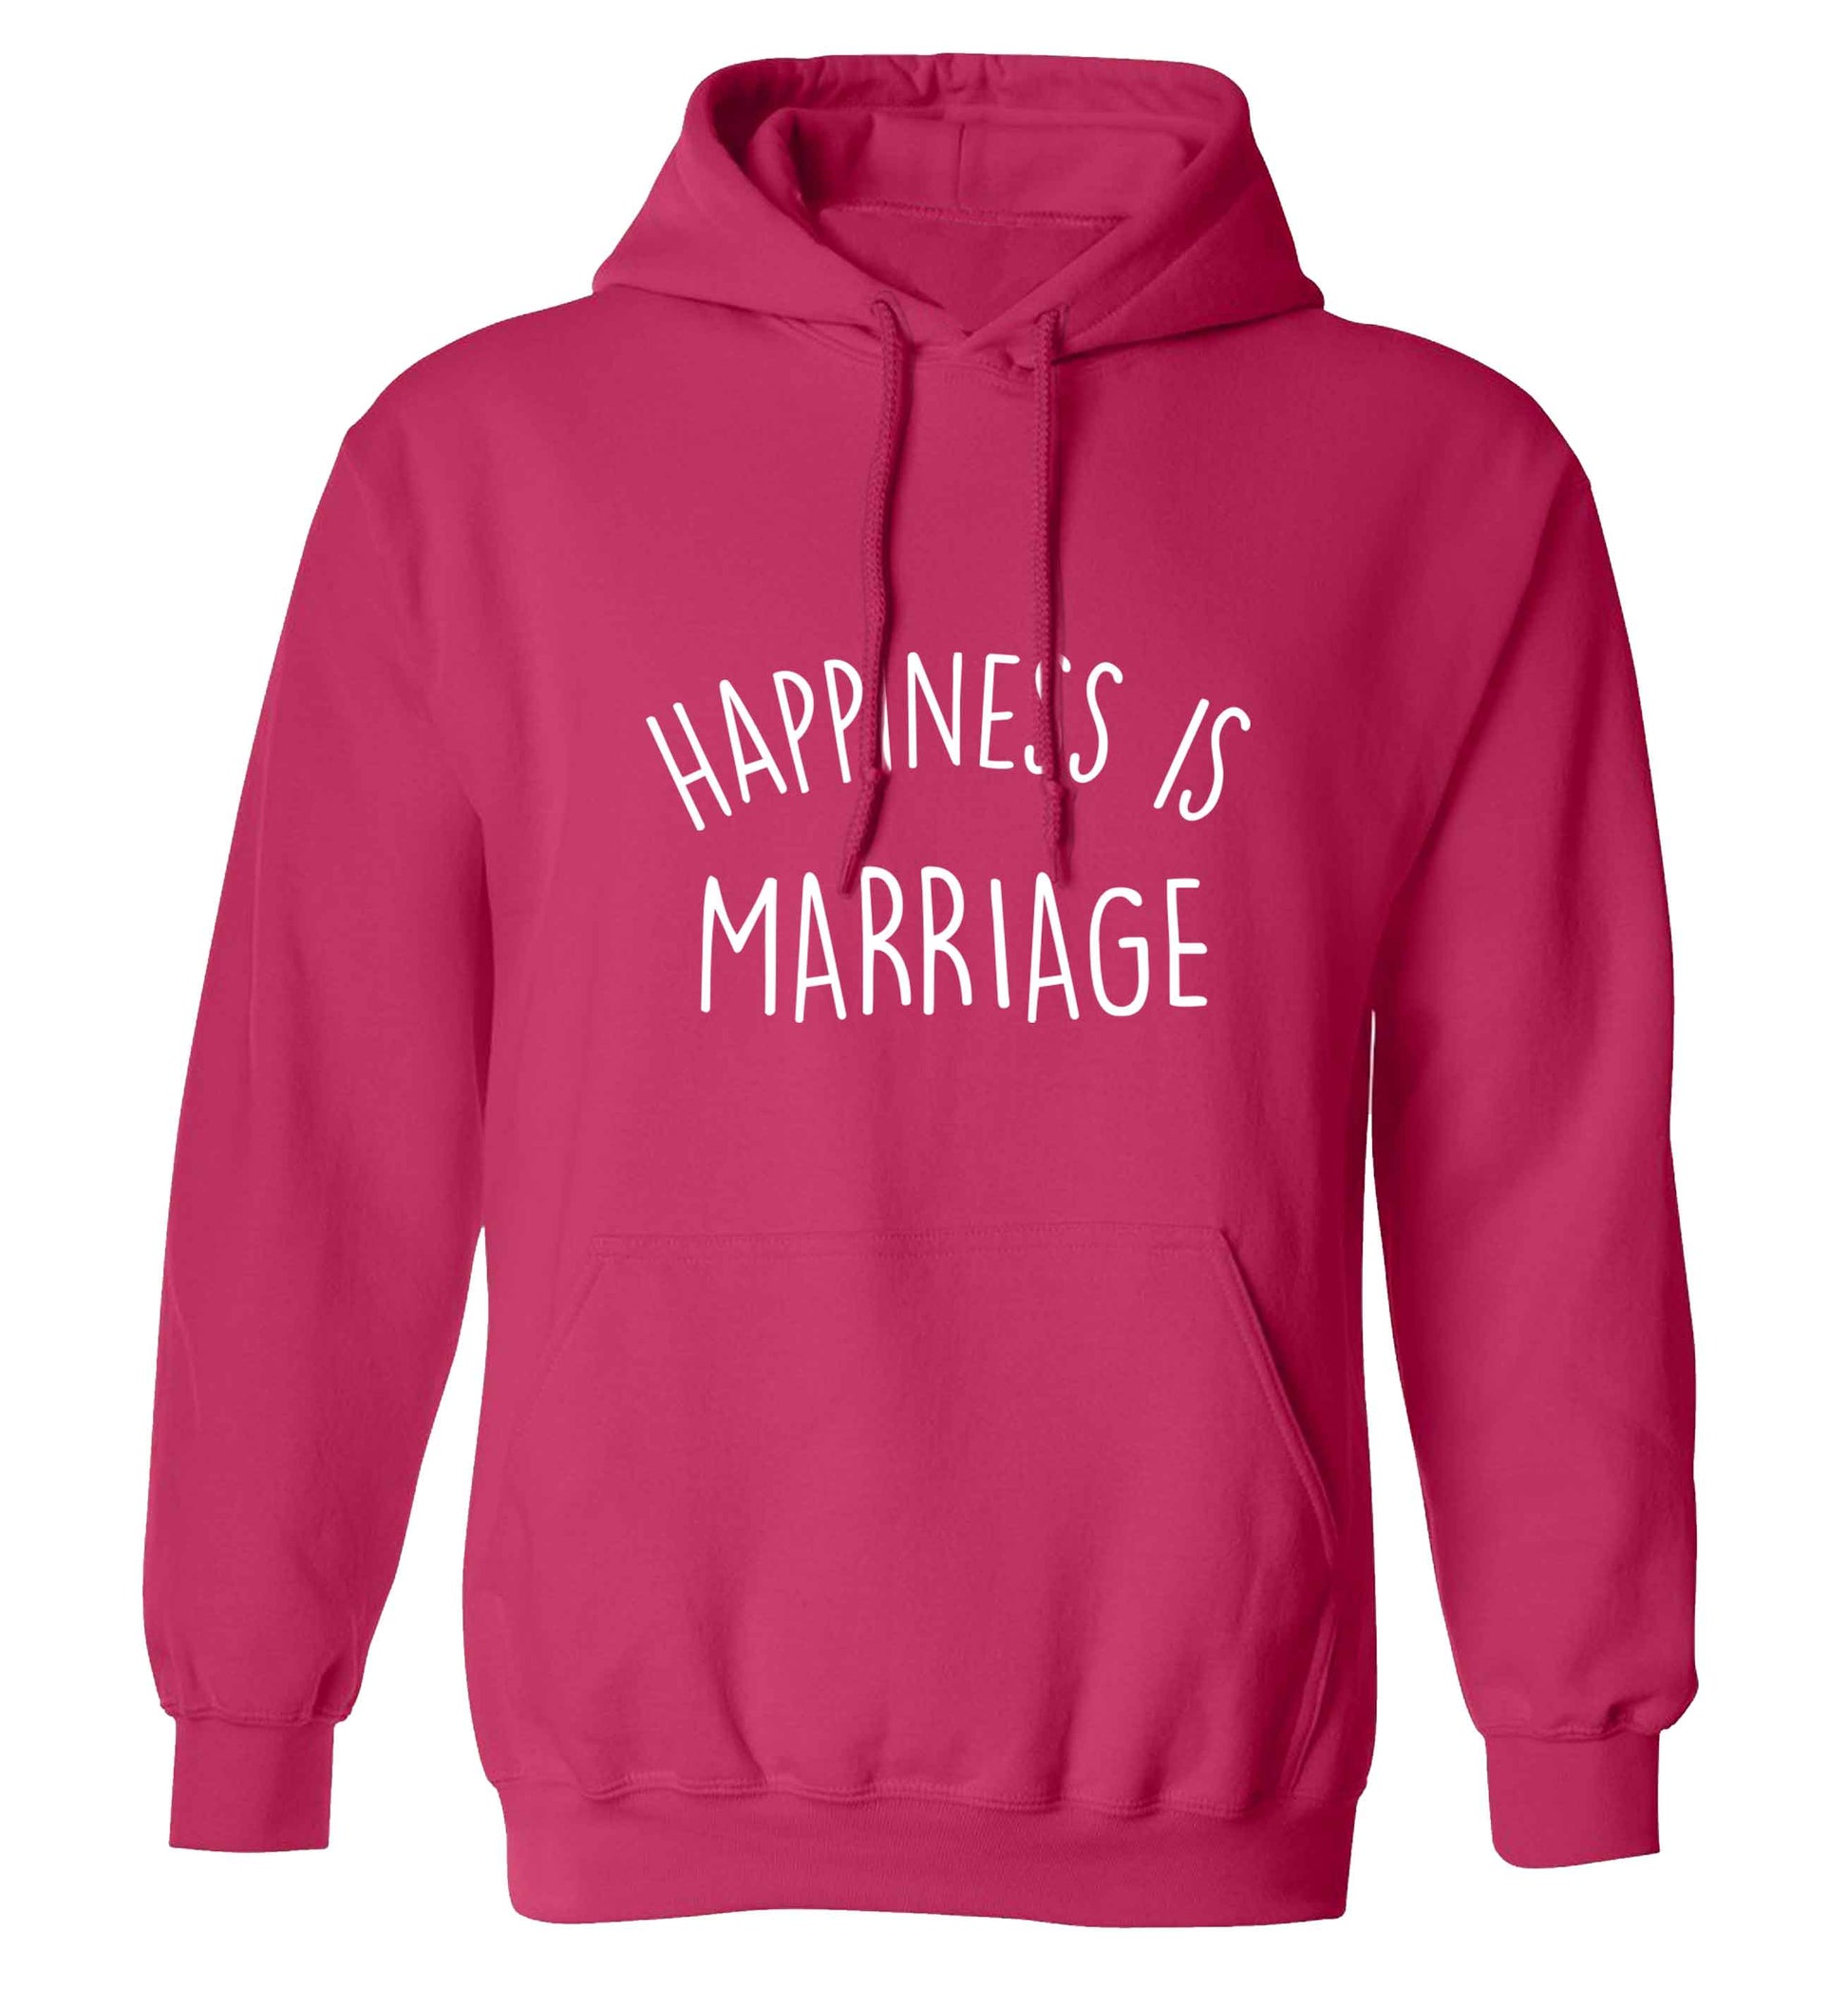 Happiness is marriage adults unisex pink hoodie 2XL